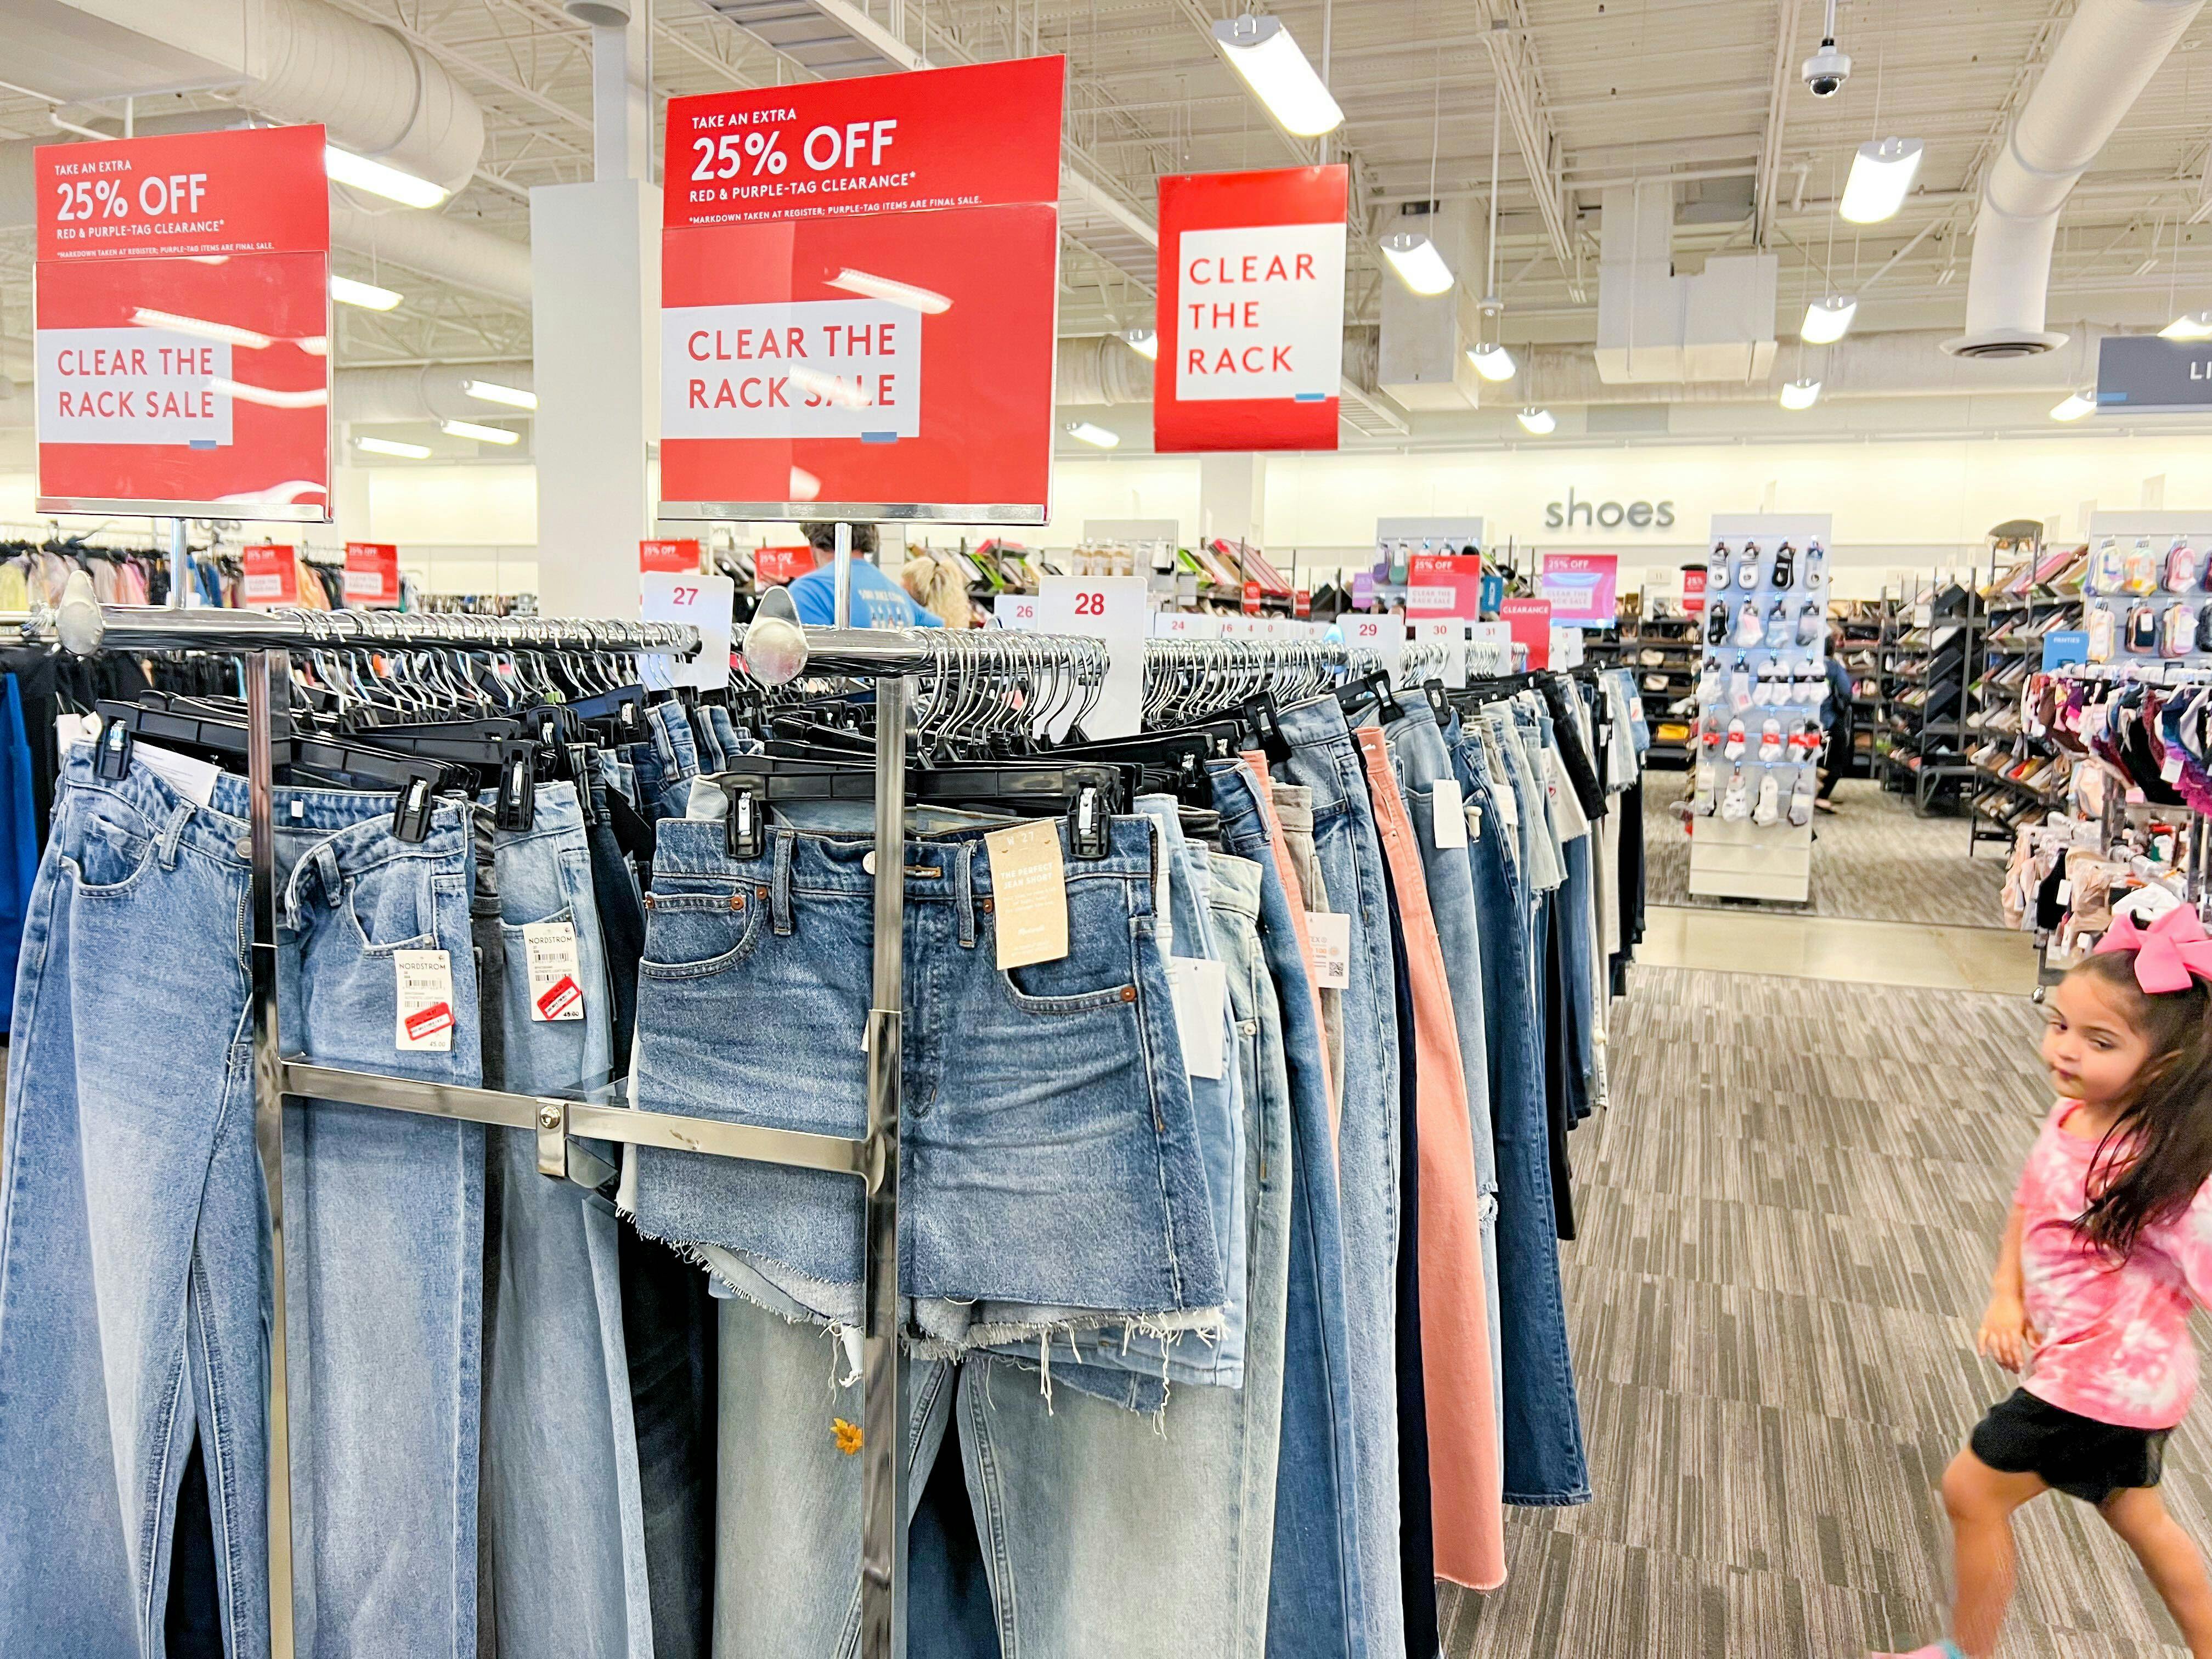 Nordstrom Rack Clear The Rack Sale Offers Extra 25% Off Clearance